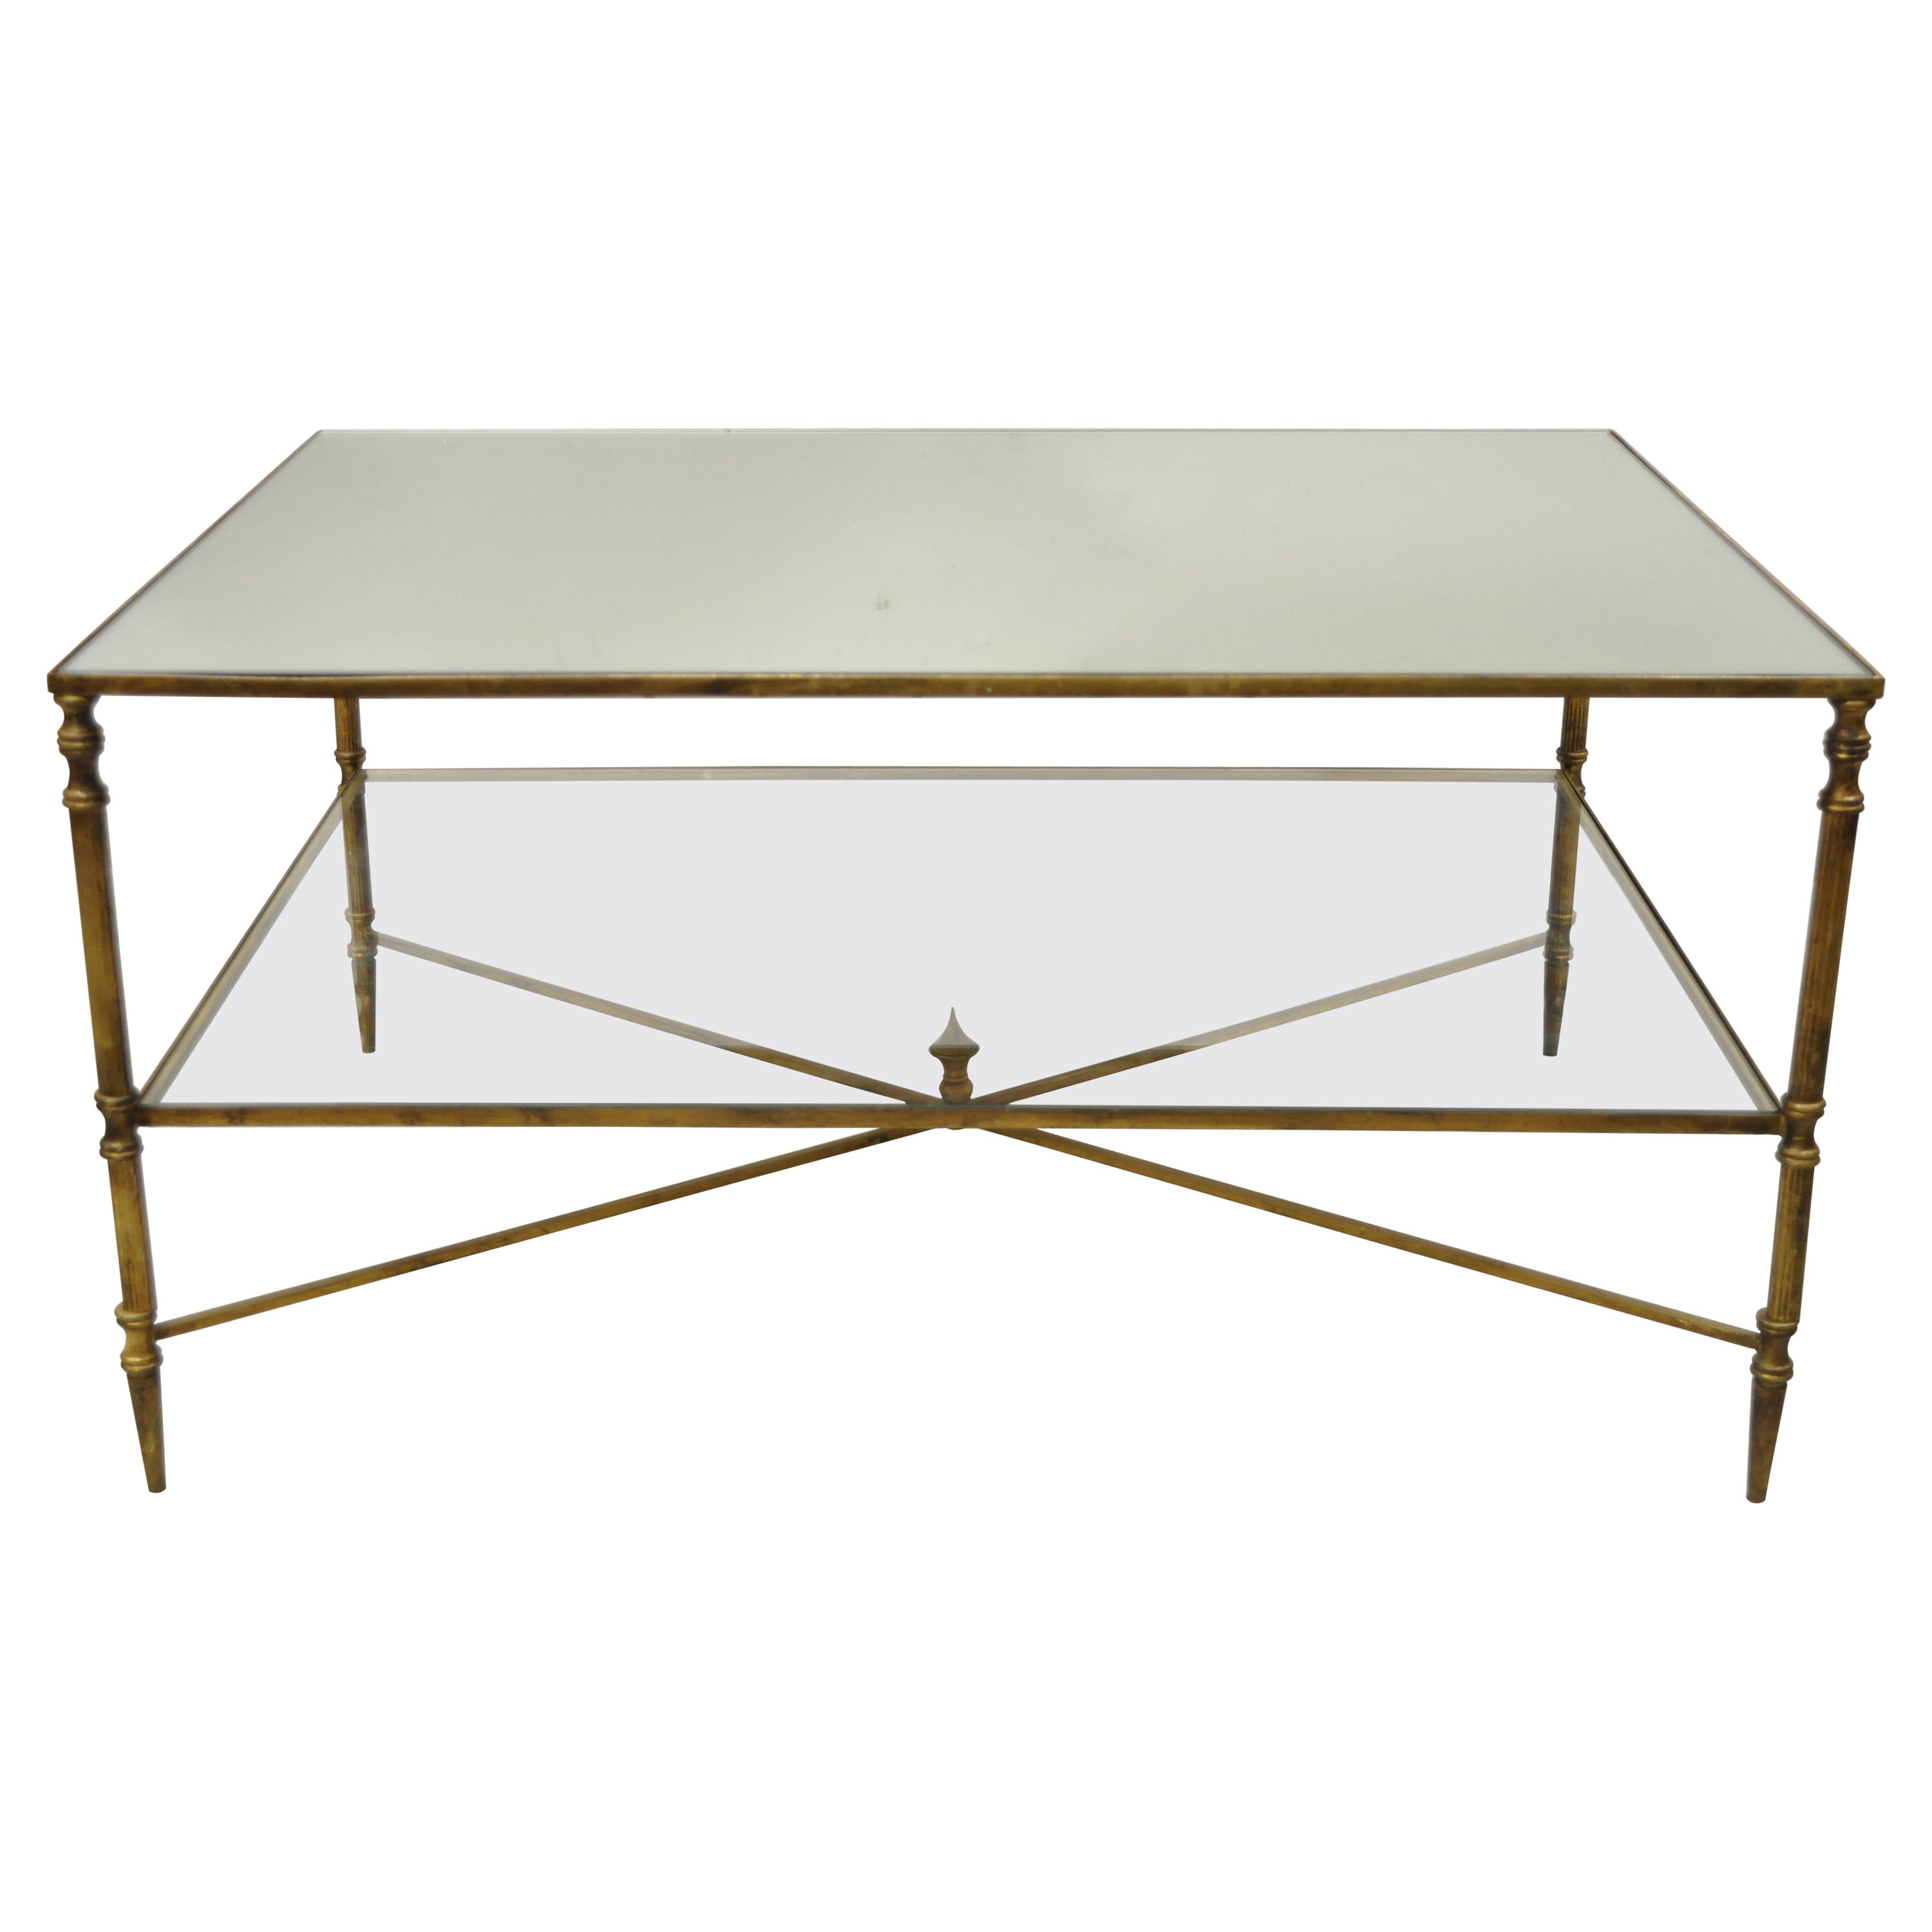 Vintage Italian Hollywood Regency Gold Iron Frame Coffee Table with Mirror Top